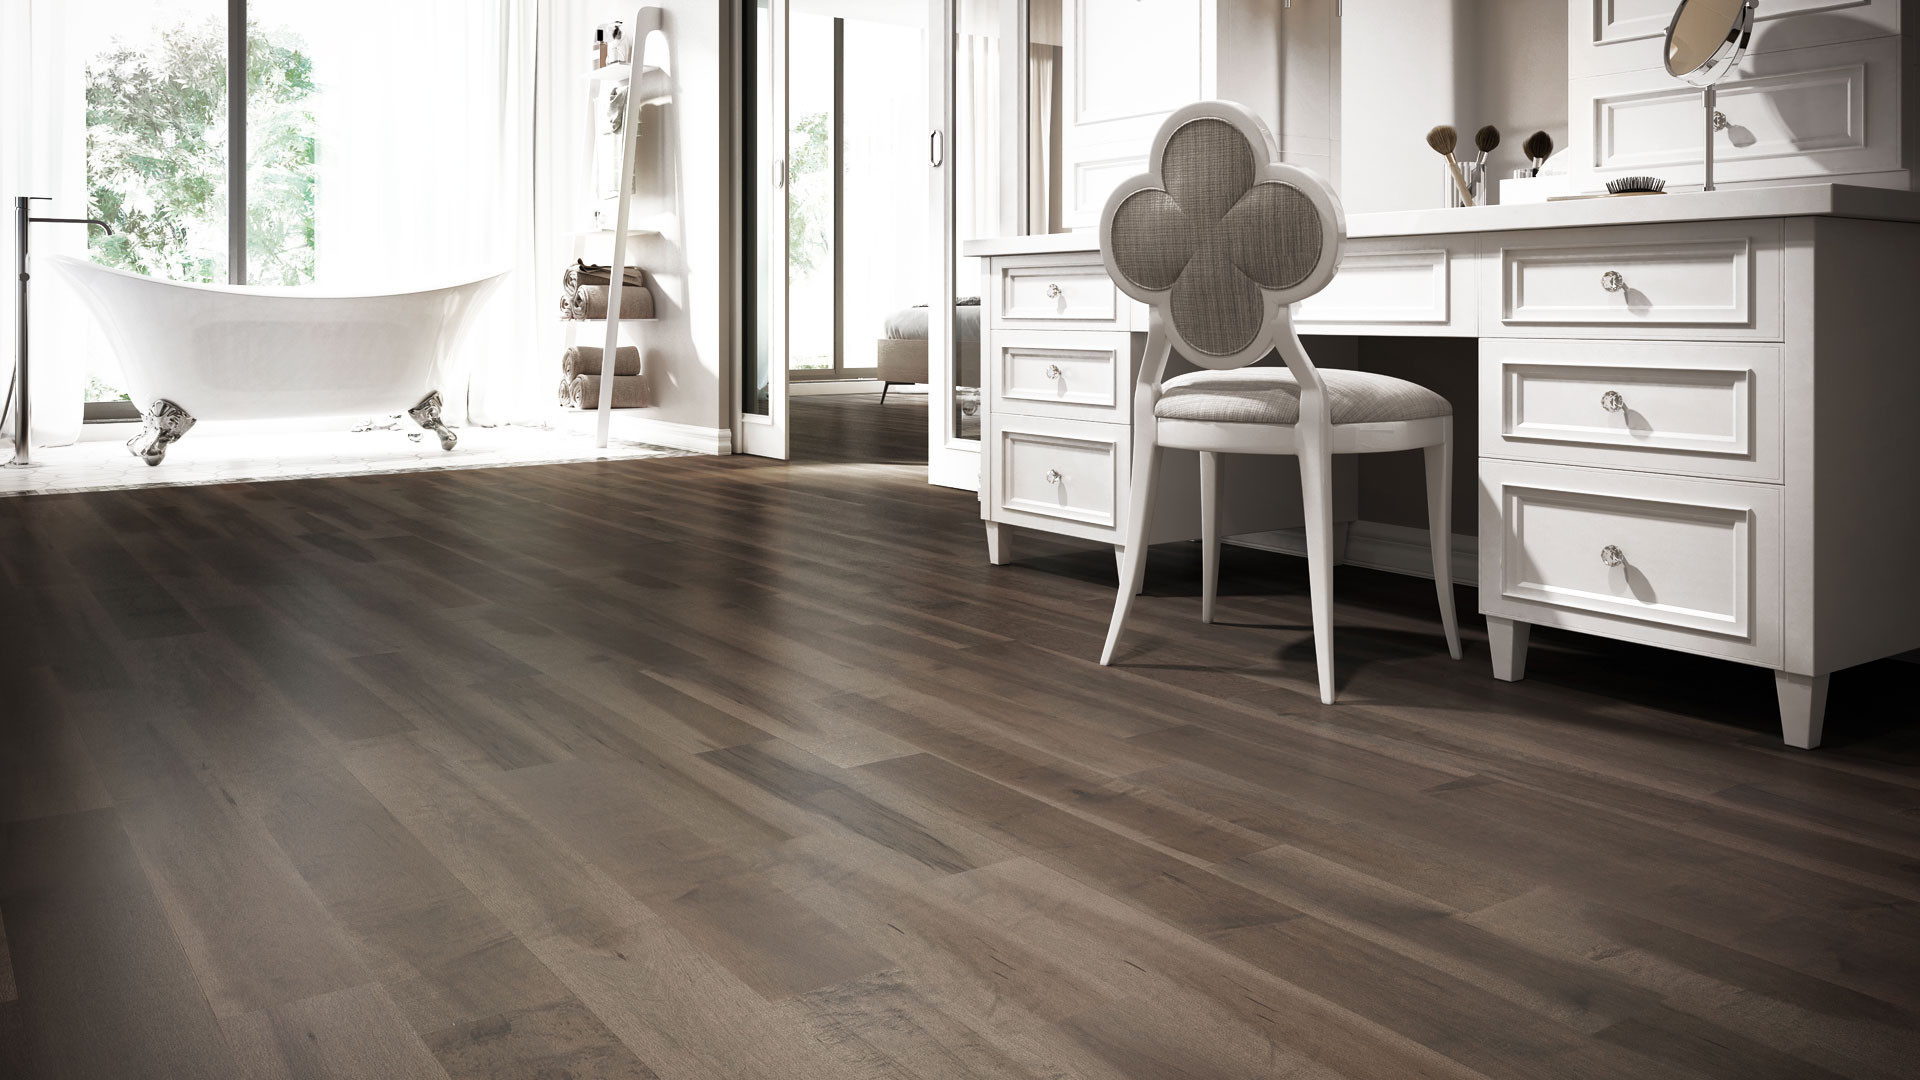 21 Unique Best Hardwood Flooring toronto 2024 free download best hardwood flooring toronto of 4 latest hardwood flooring trends lauzon flooring inside learn more about our pure genius by reading our blog post the smartest hardwood flooring weve ever 